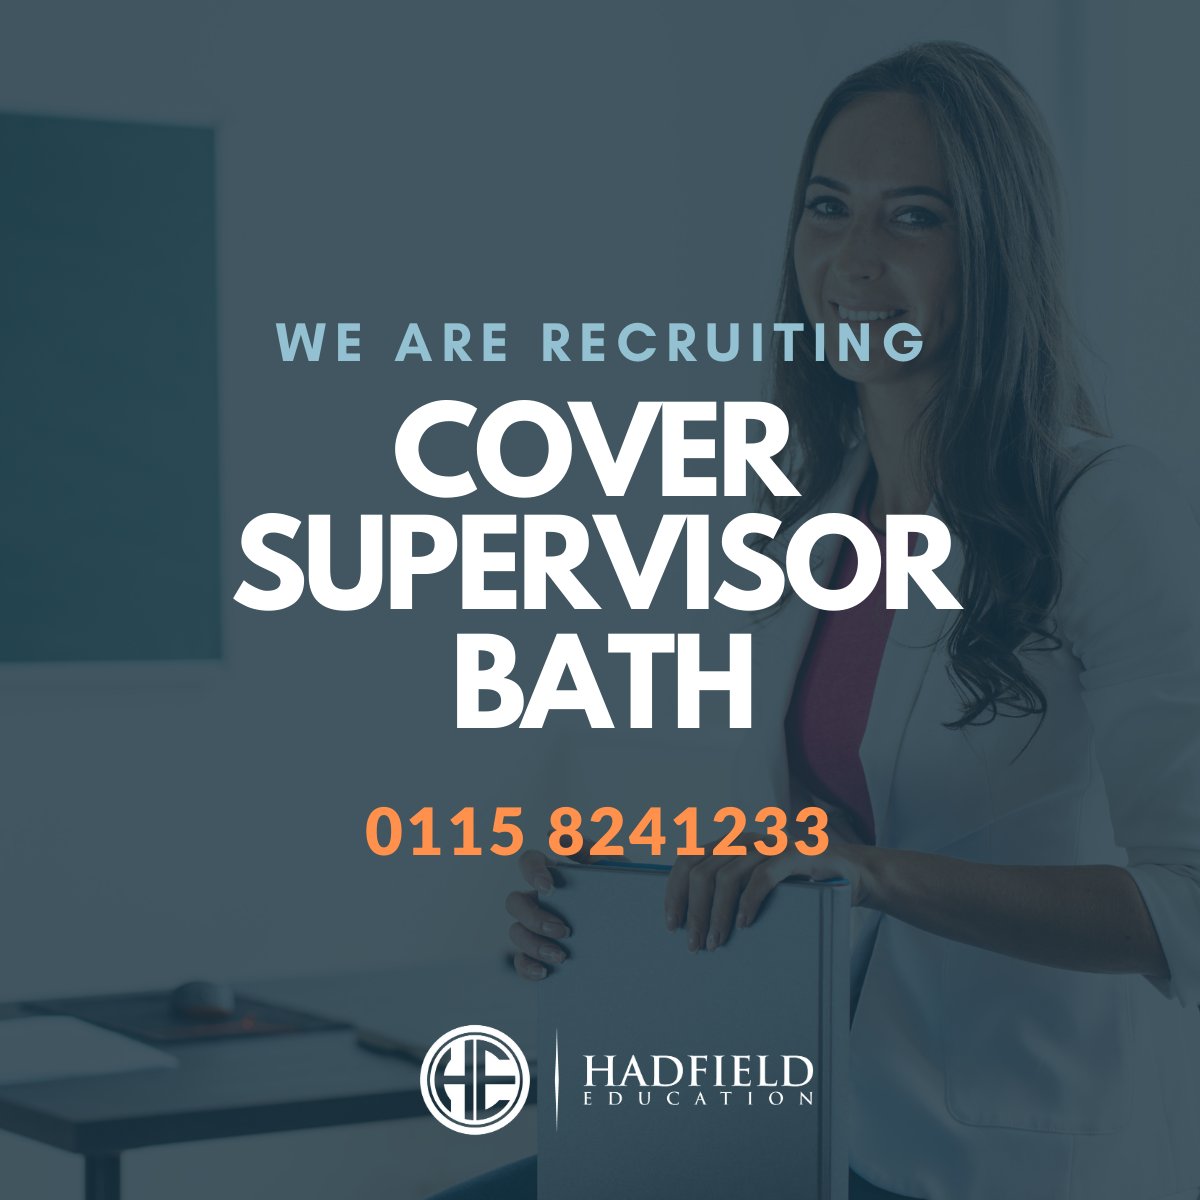 📢 Exciting job opportunity! 📢 Become a Cover Supervisor in 📍Bath! 🎓 Join our team and make a difference! 💼 #BathJobs #TeachingJobs #CoverSupervisorJobs 🚀 bit.ly/3OS5WYX